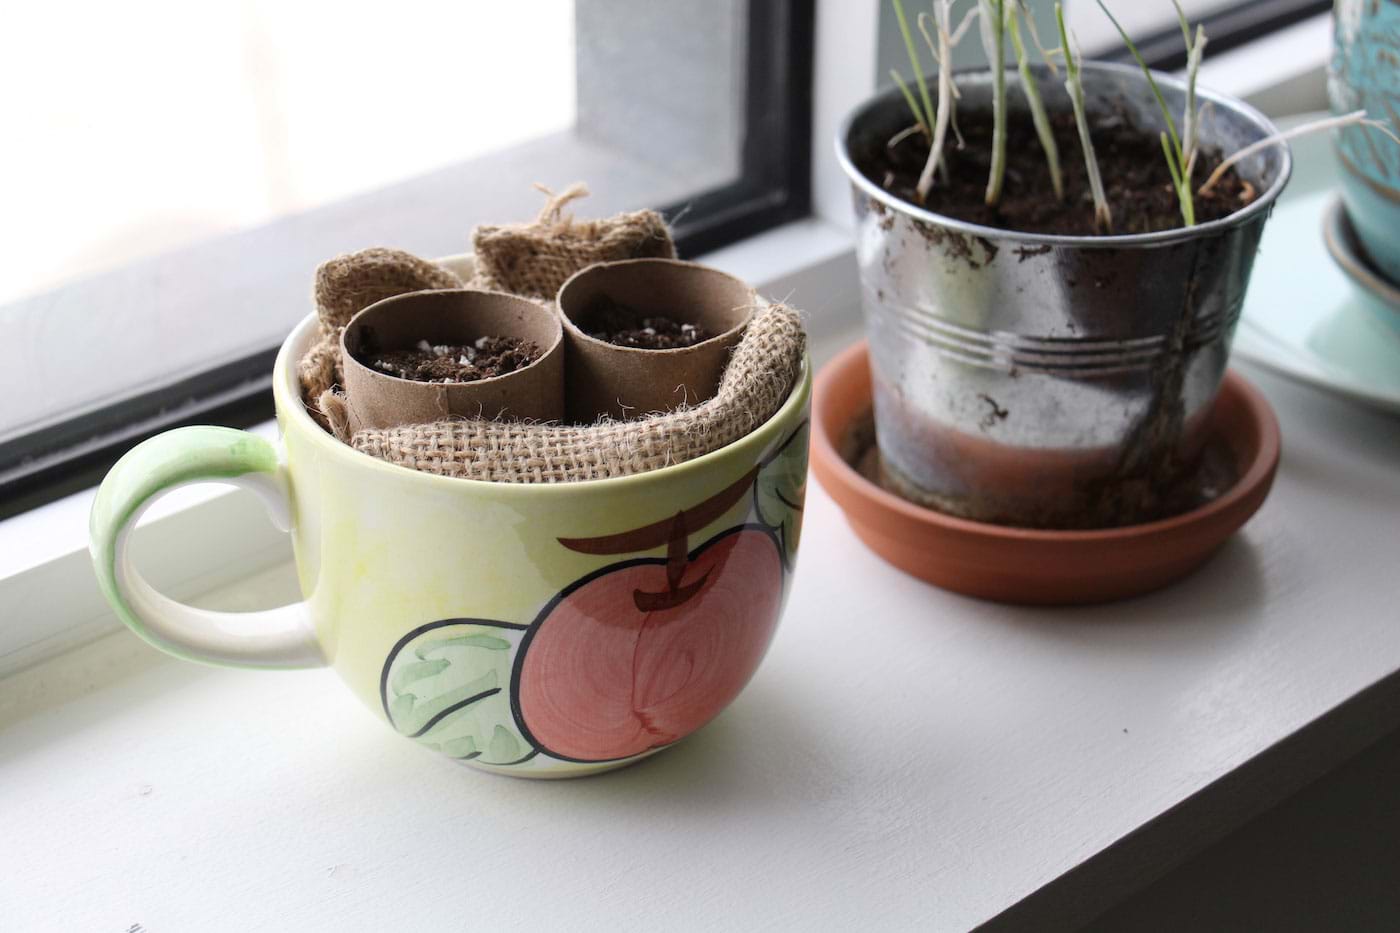 Seeding pots made with toilet paper roll crafts